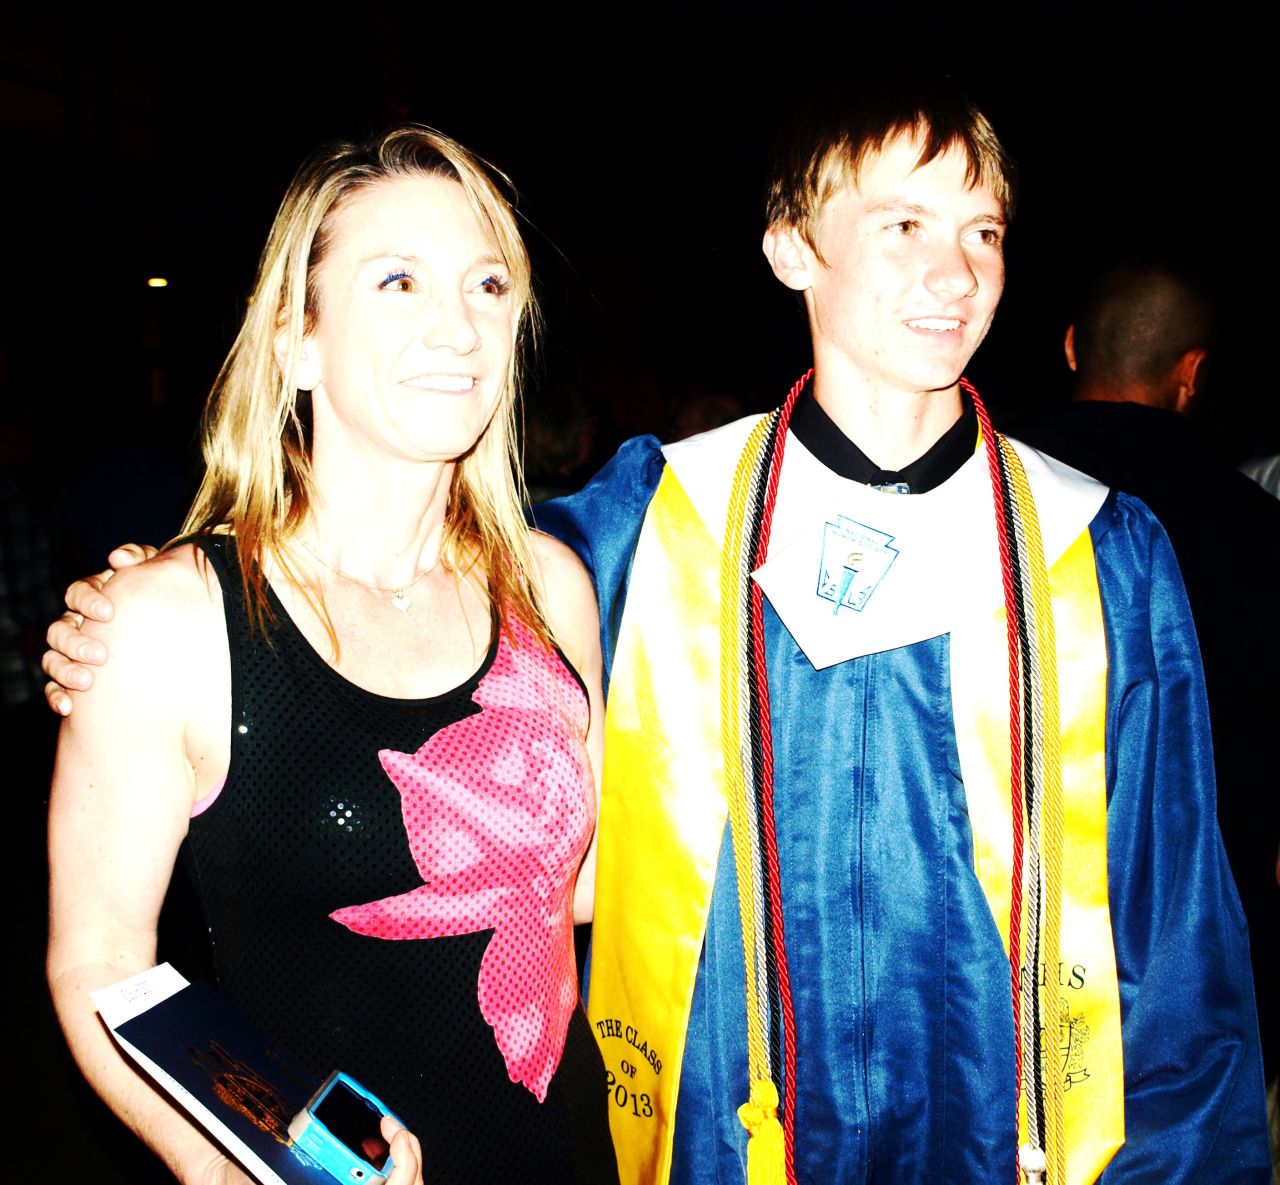 Mitchell and her son pose for a photo at his  high school graduation. "I've been telling him most of these things all along, and I guess it was just one last chance to tell him 'remember this' or 'stay-the-course, kid,' " she said.